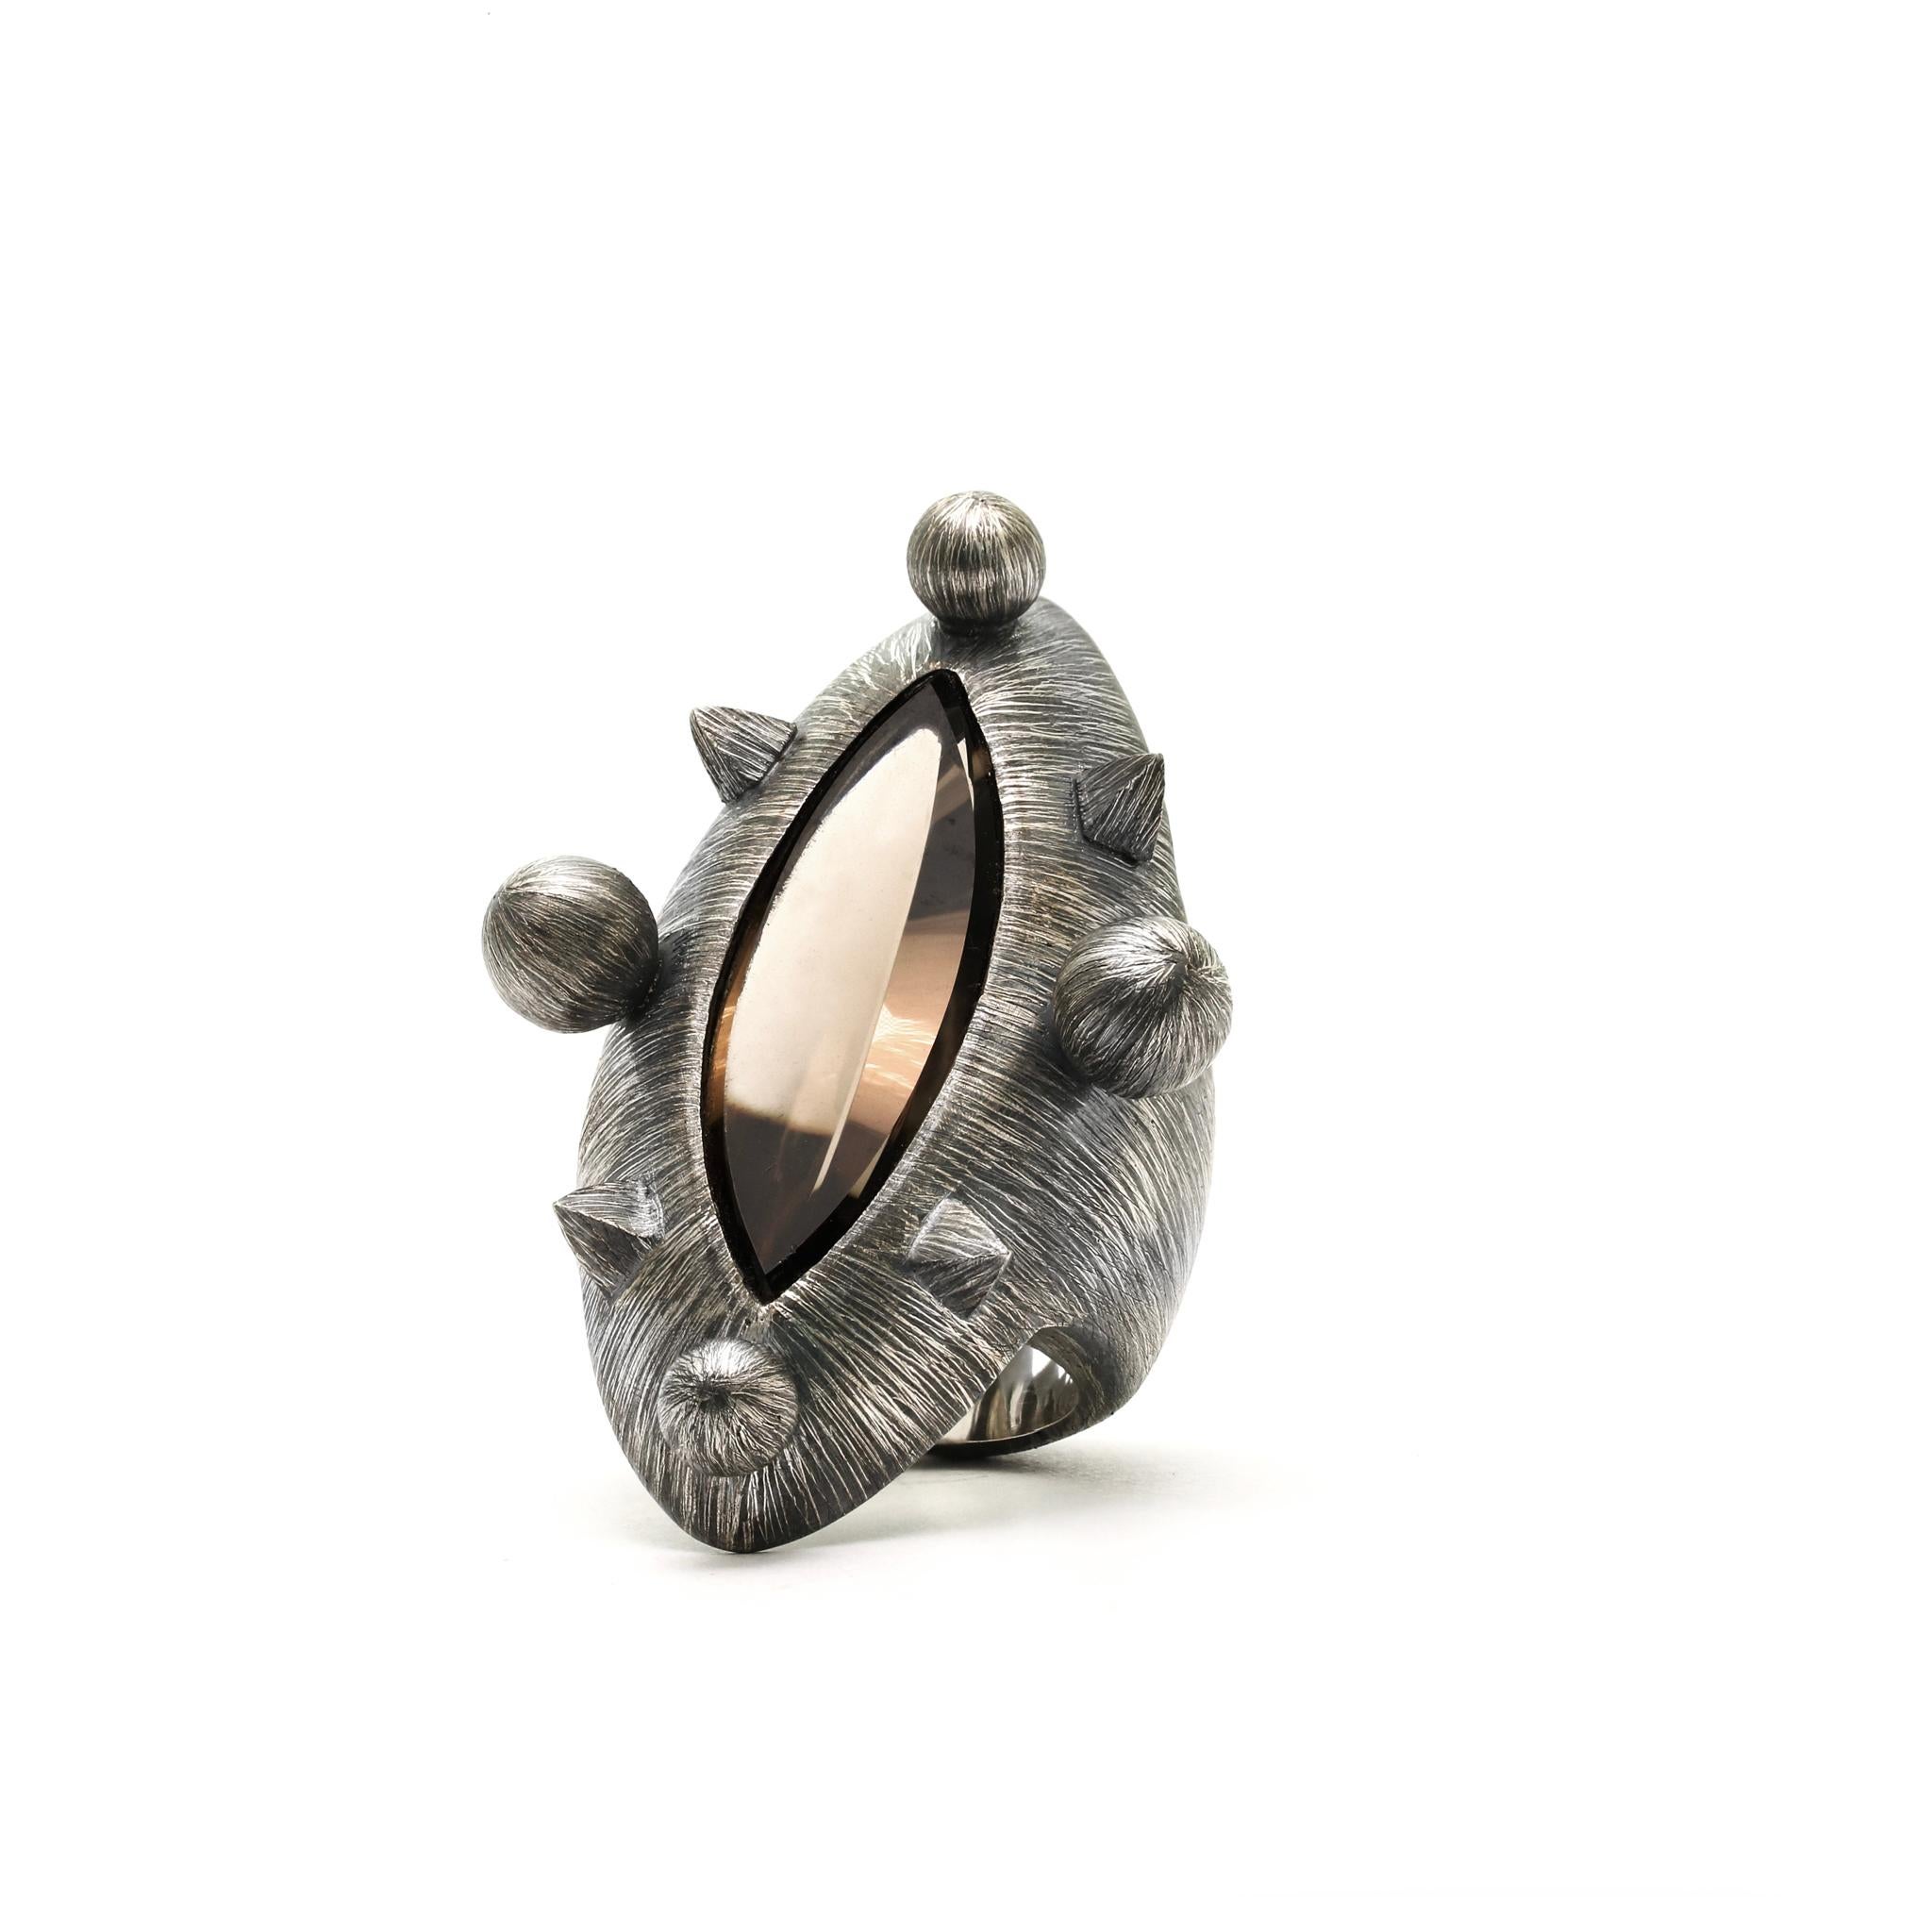 Constellation Ring, Etched Sterling Silver & Smoky Quartz 1